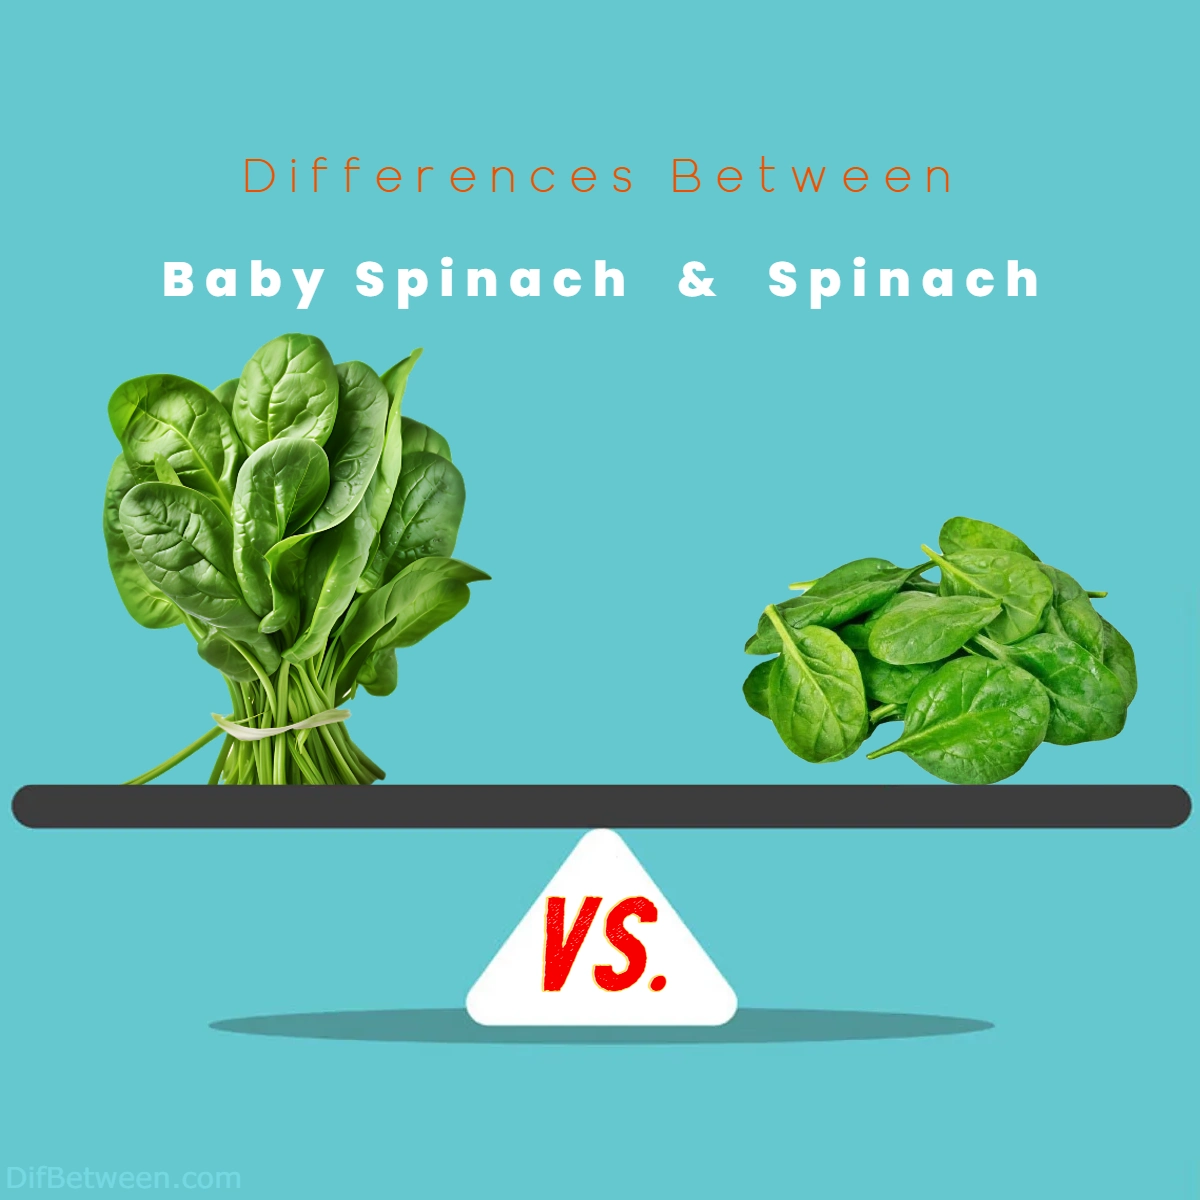 Differences Between Baby Spinach and Spinach